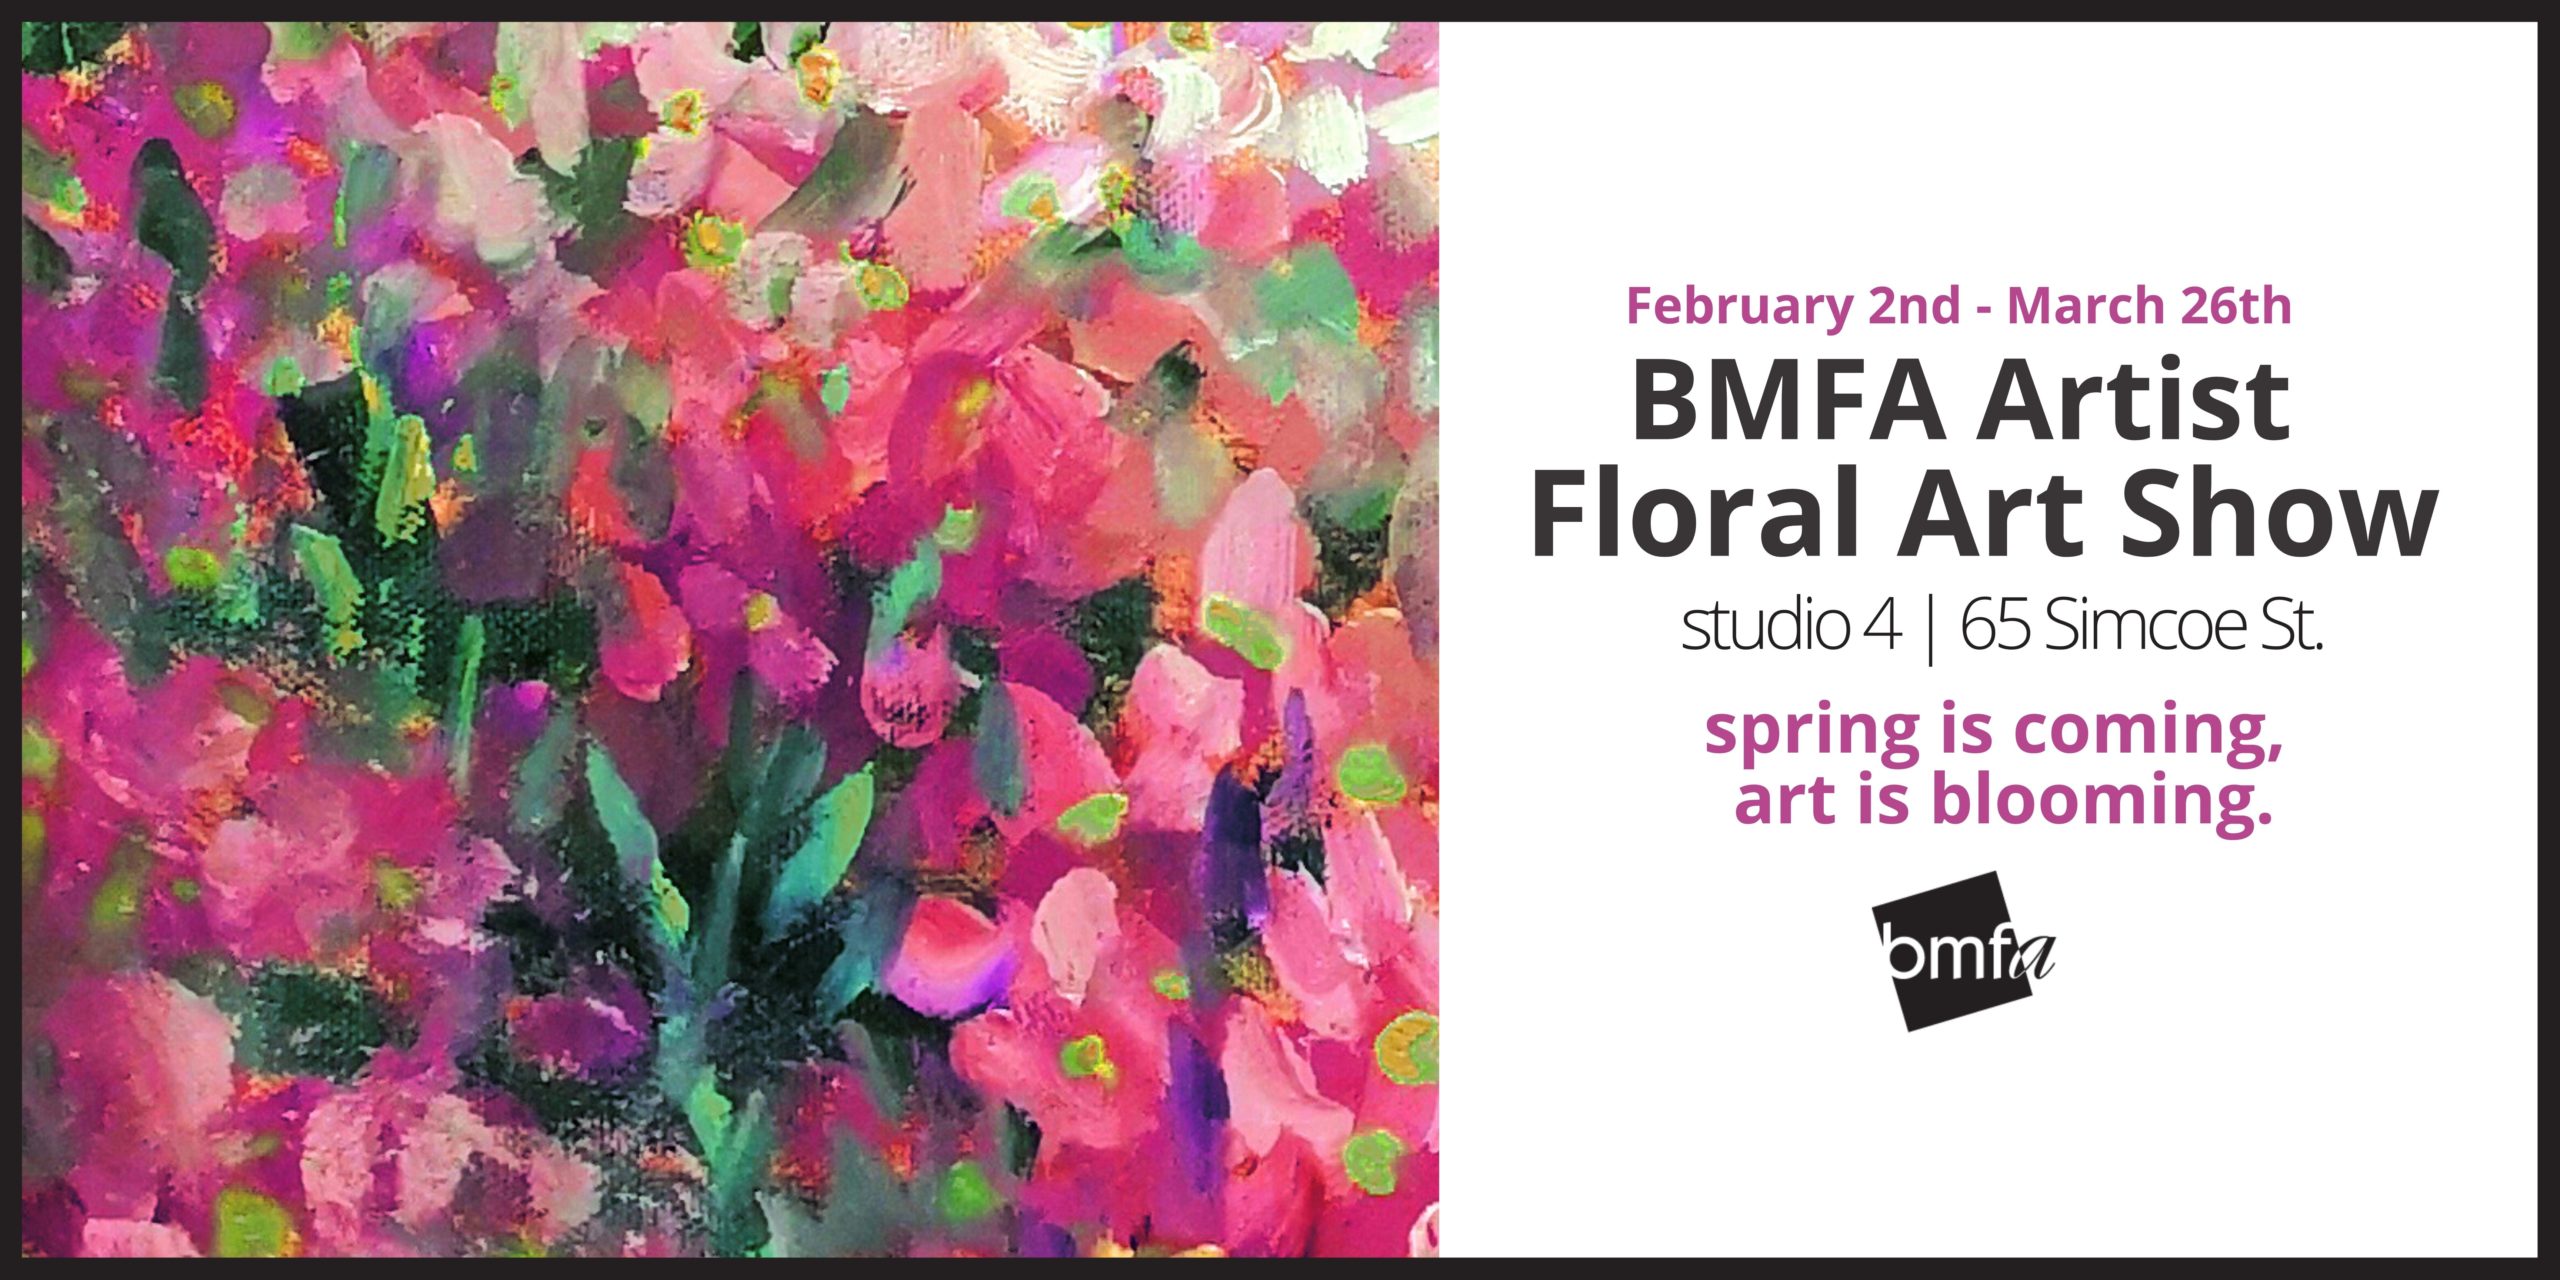 BMFA Artist Floral ArtShow with image of flower painting